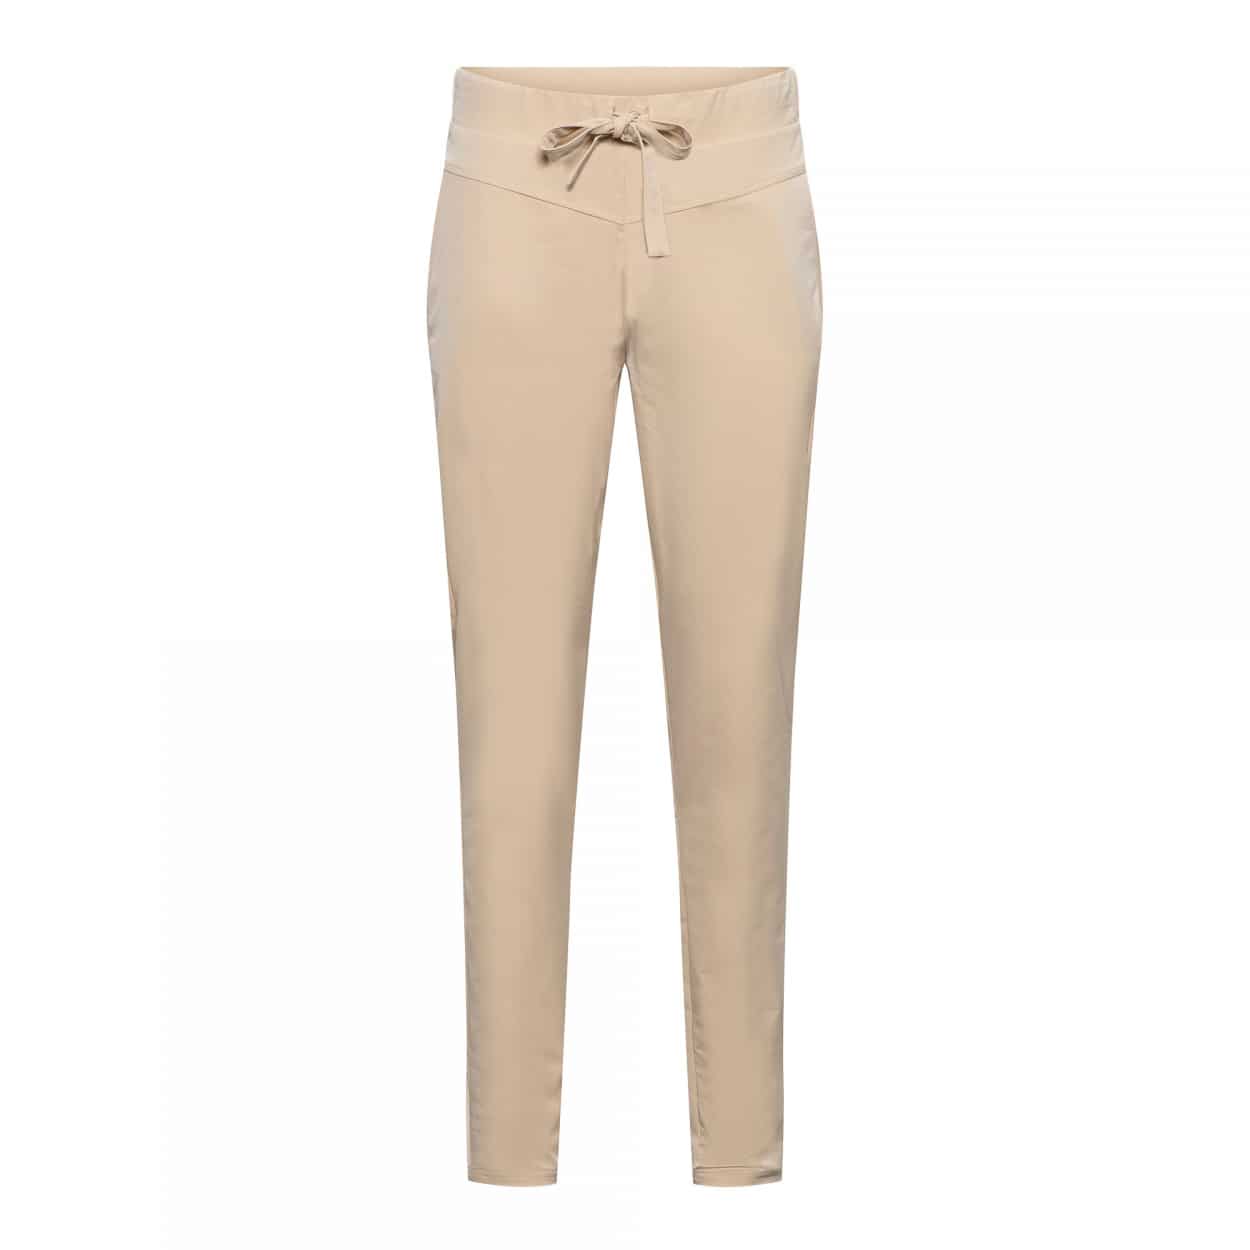 &Co Woman Peppe Travel Pant - Light Sand